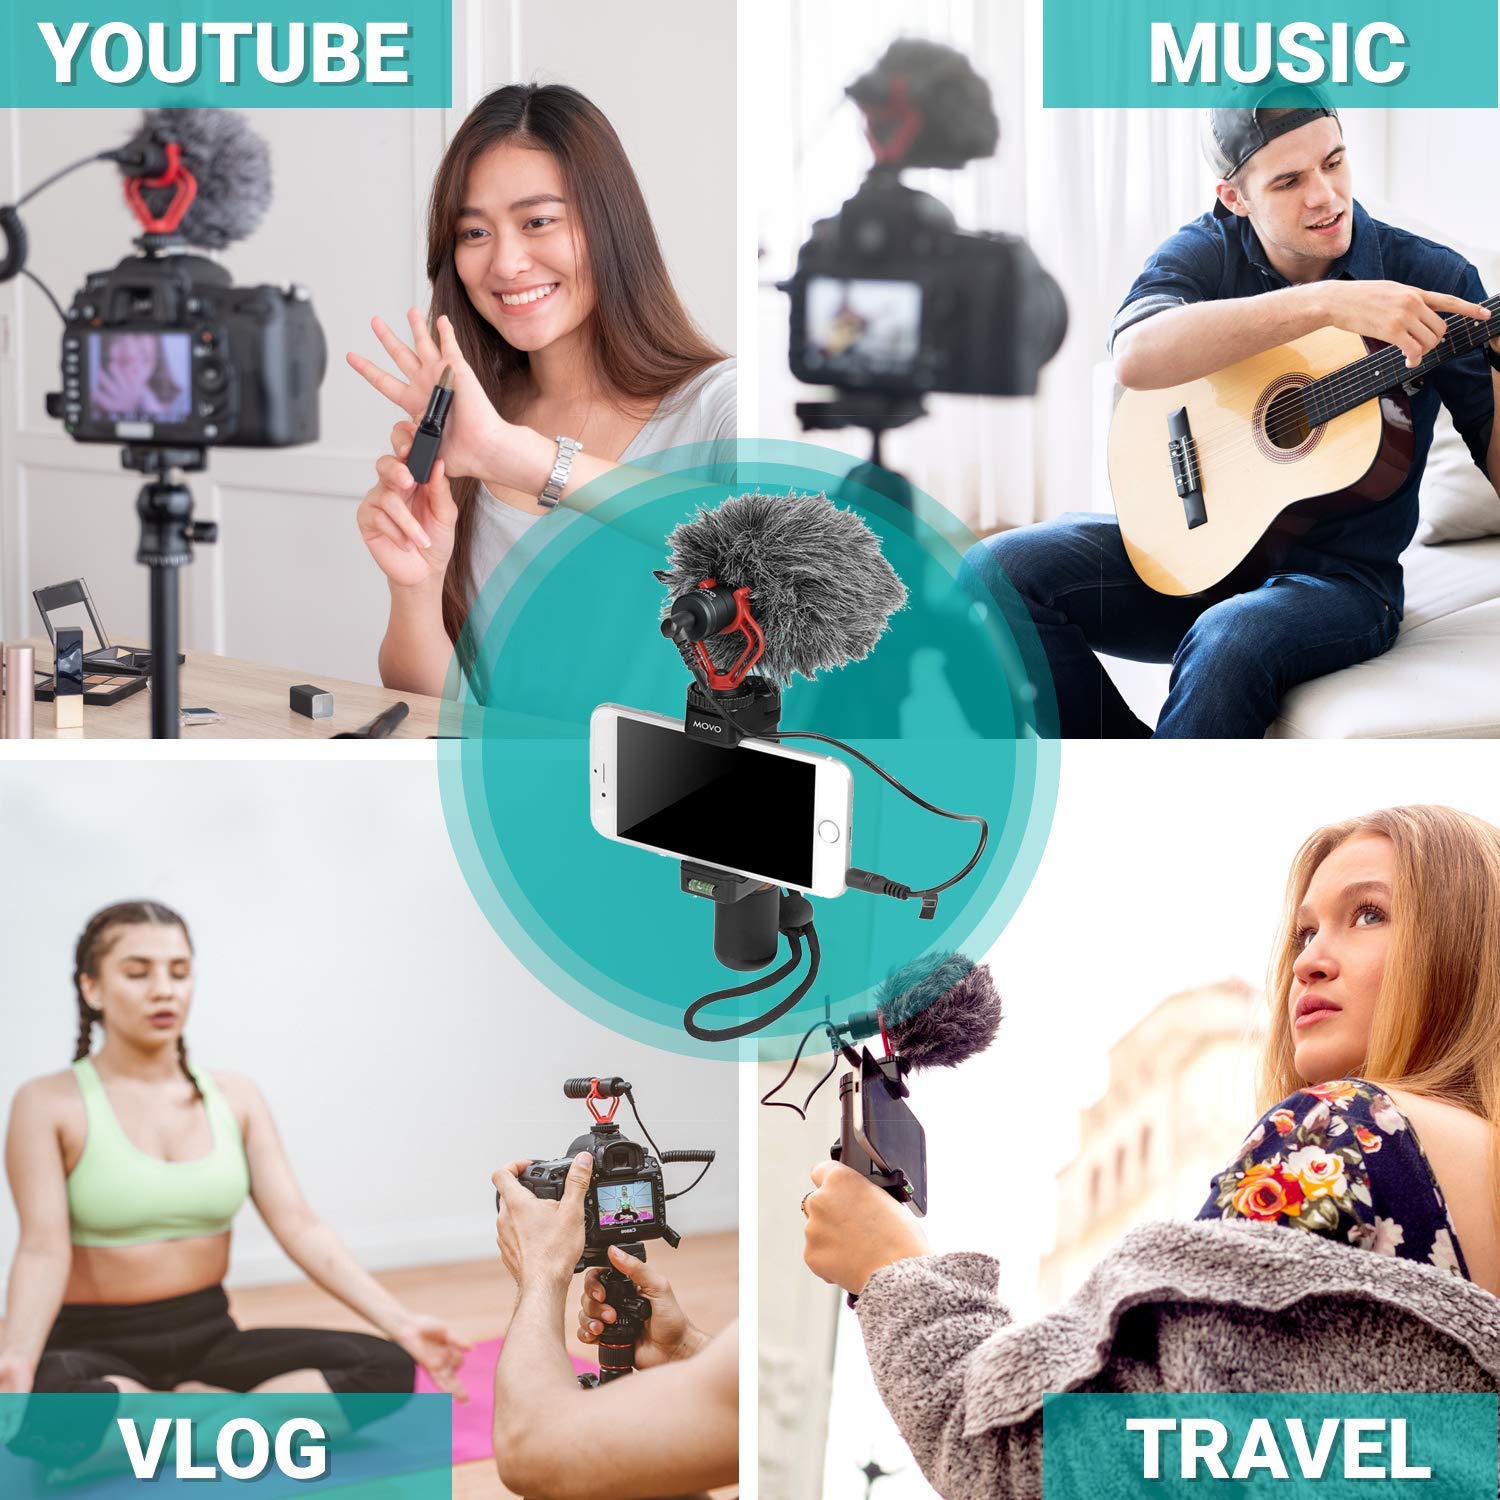 Movo Smartphone Vlogging Kit for iPhone with Shotgun Microphone, Grip Handle, Wrist Strap for iPhone and Android Smartphones for TIK Tok, Vlog, YouTube Starter Kit and Content Creator Kit  - Acceptable